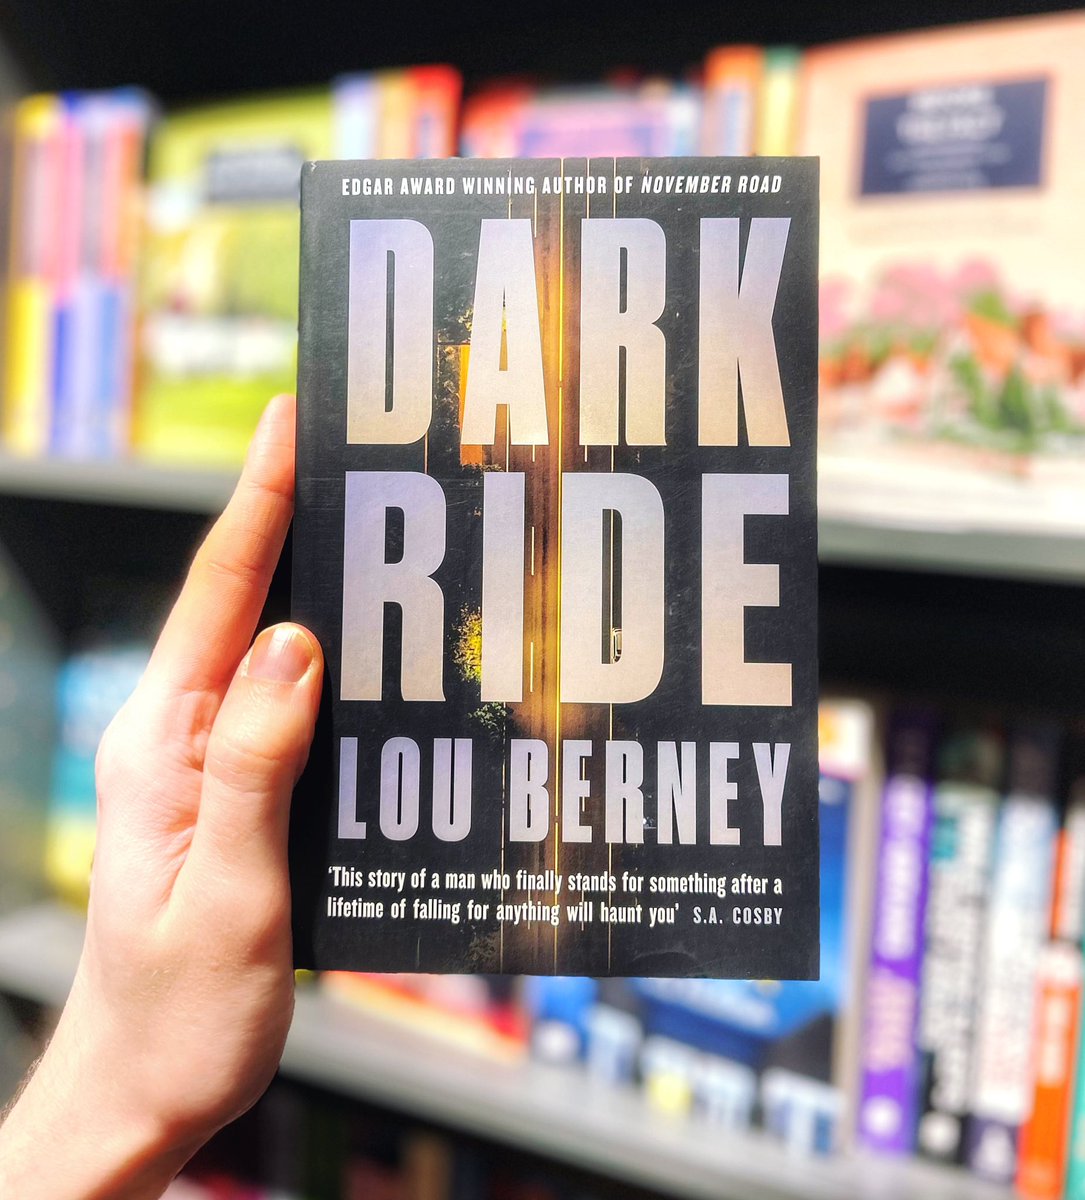 Sunday Staff Reads! 📖 This week Craig is racing through Dark Ride, the thrilling story of an unexpected hero who takes an interest in two hurt kids & ends up in over his head taking on a violent father & gang boss.